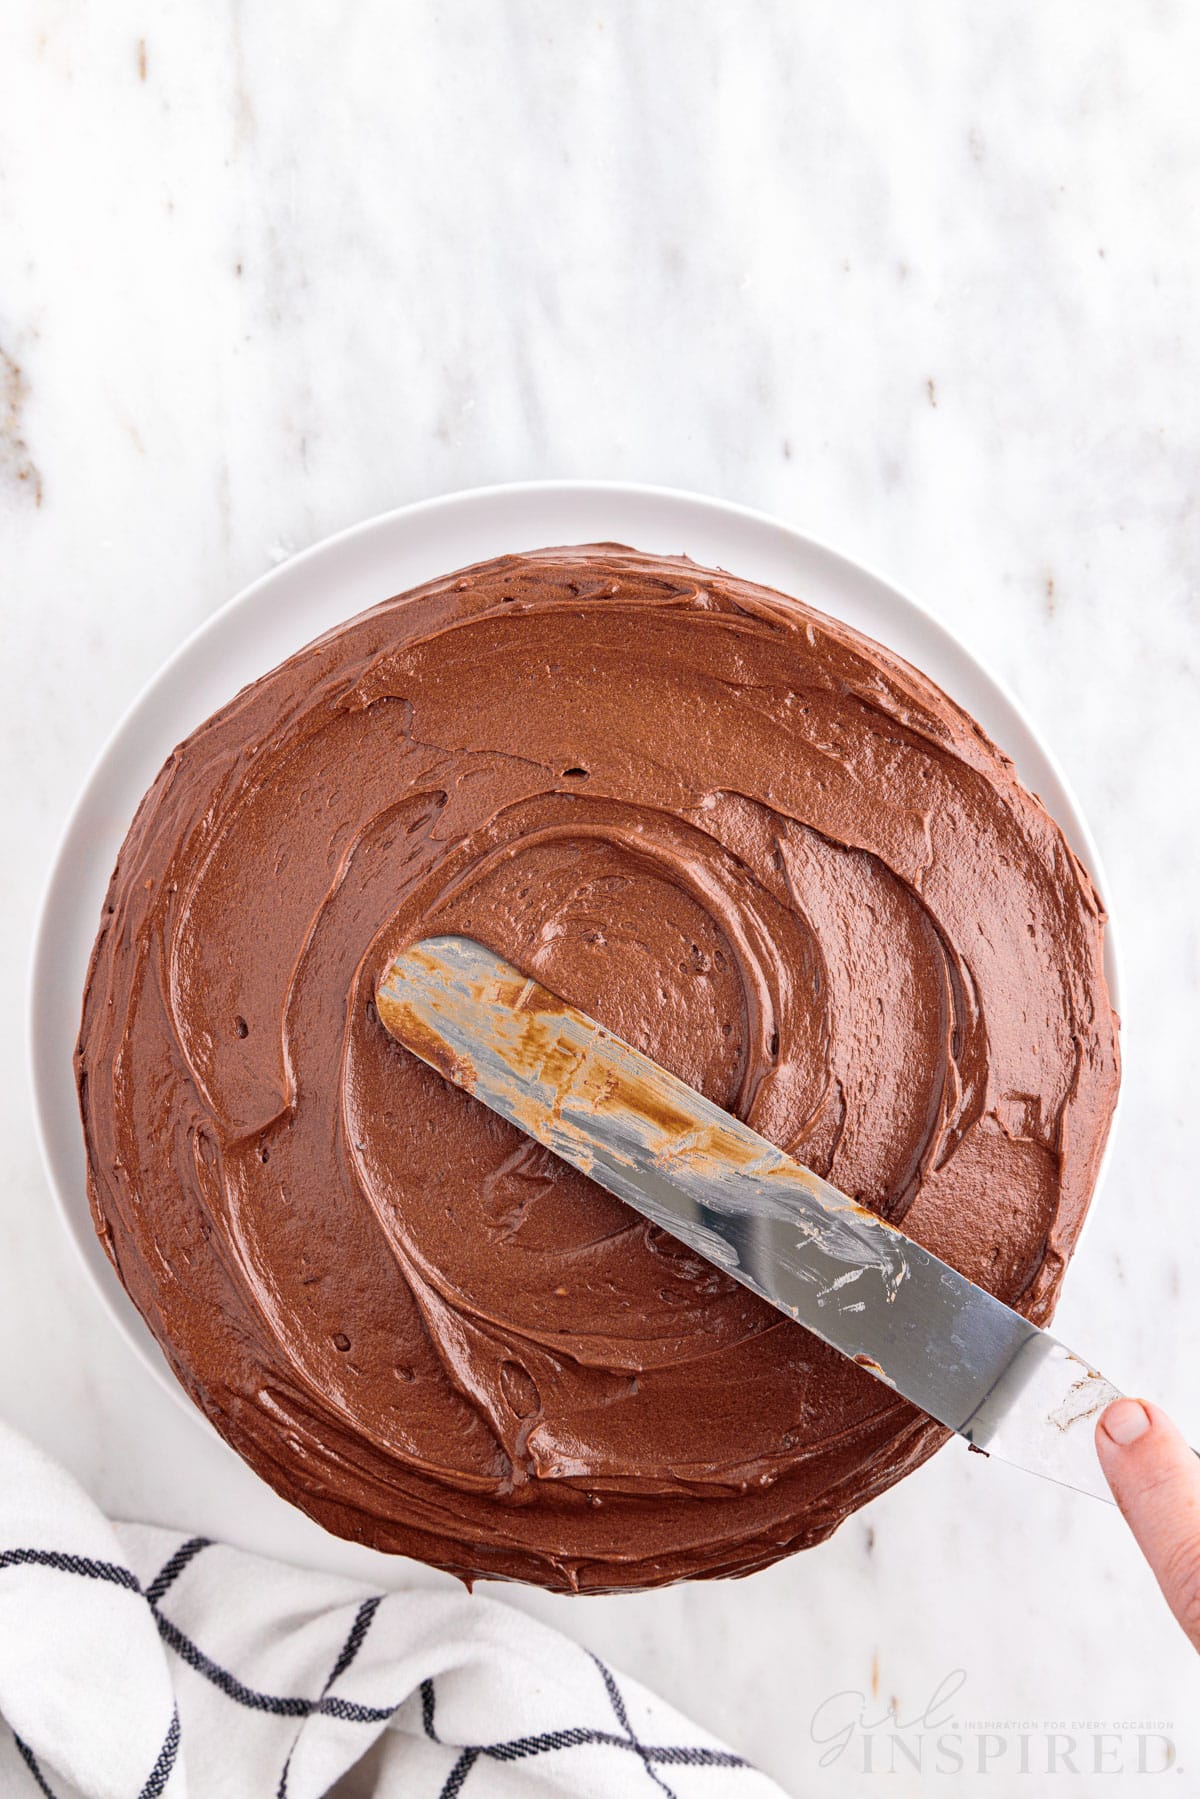 Hand smoothing chocolate frosting over the top layer of the stacked marble cake in a glass cake dish, checkered linen, on a marble countertop.